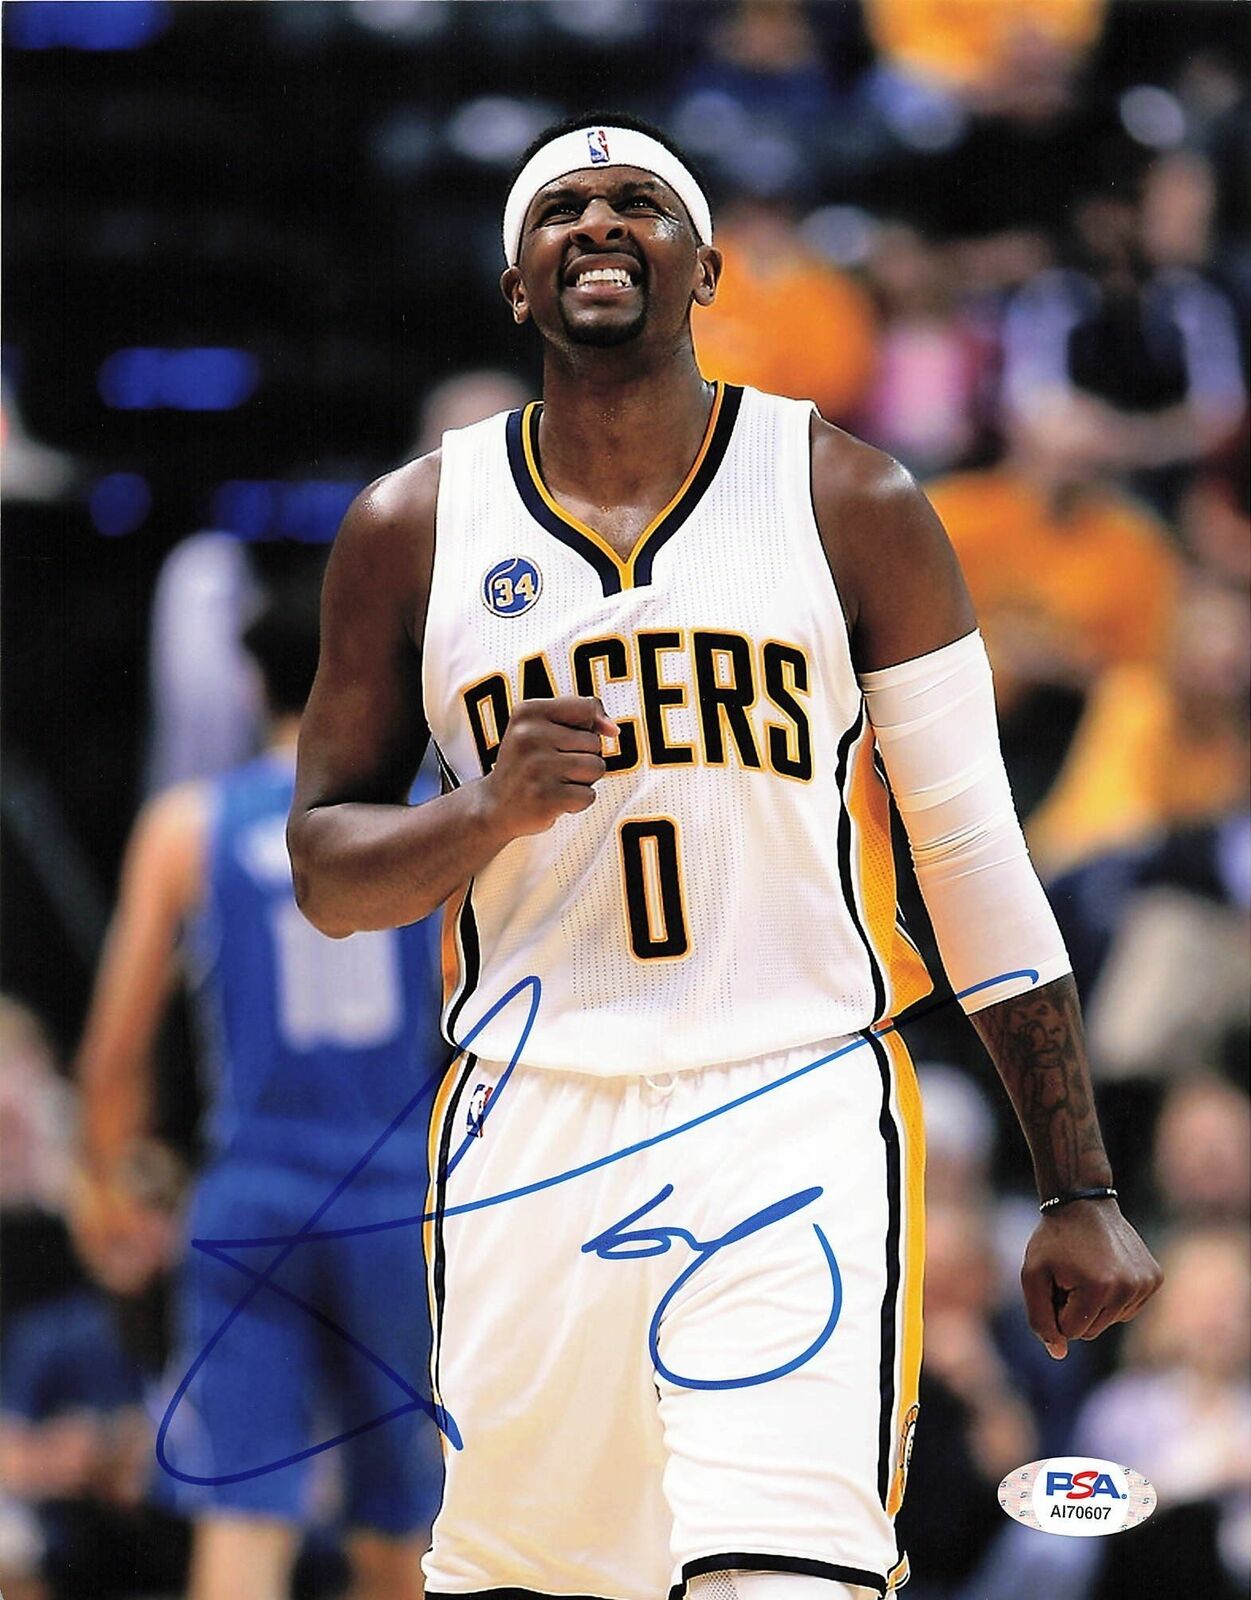 CJ MILES Signed 8x10 Photo Poster painting PSA/DNA Indiana Pacers Autographed